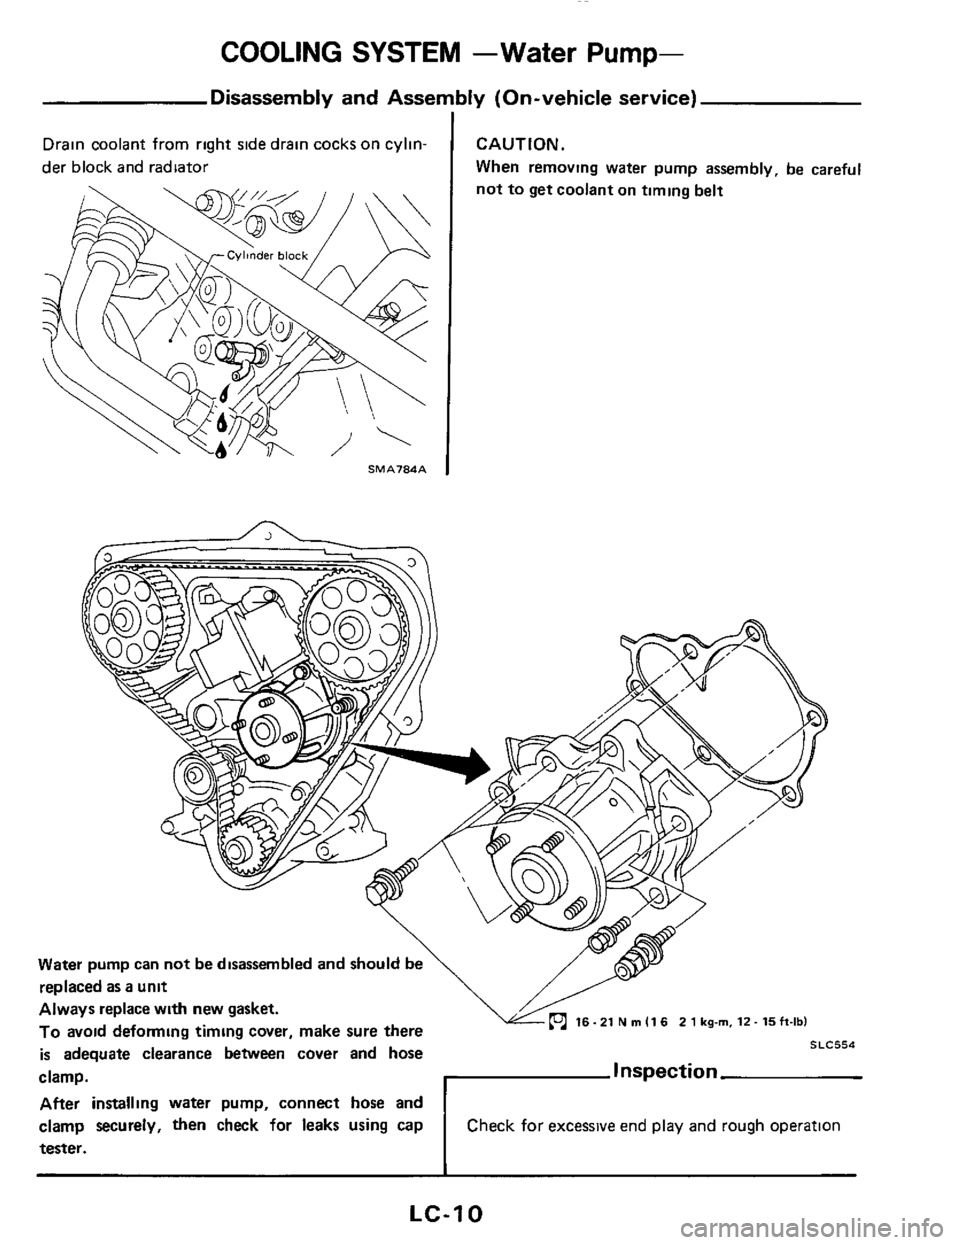 NISSAN 300ZX 1984 Z31 Engine Lubrication And Cooling System Workshop Manual COOLING SYSTEM -Water Pump- 
Drain coolant  from right side drain  cocks  on cylin- 
der  block  and radiator CAUTION. 
When  removing  water pump  assembly,  be careful 
16- 21 N m I1 6  2 1 kgm. 12-